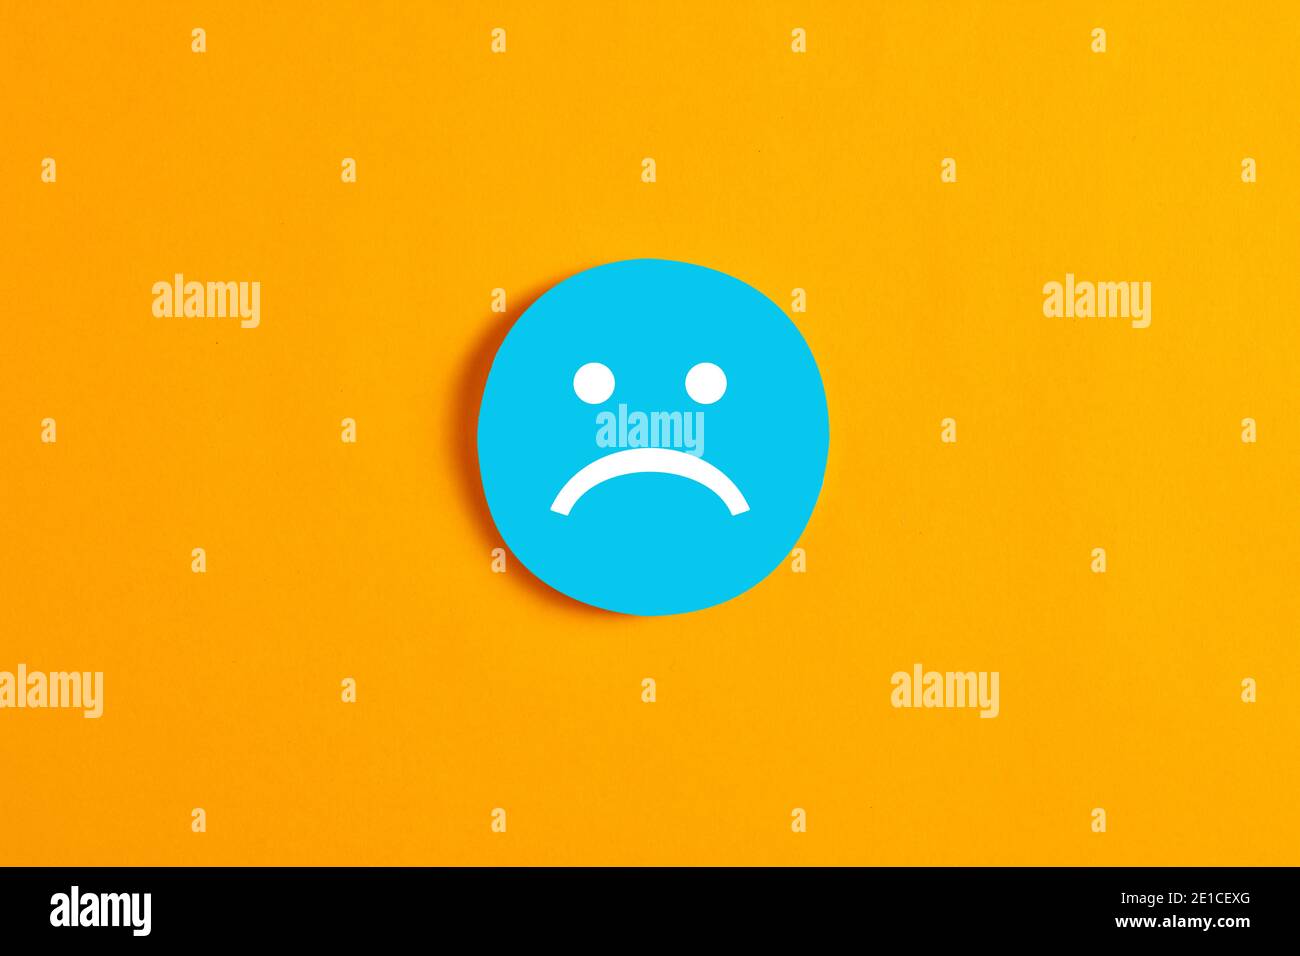 Blue round circle with a sad face icon against yellow background. Negative expression or customer dissatisfaction in business concept. Stock Photo